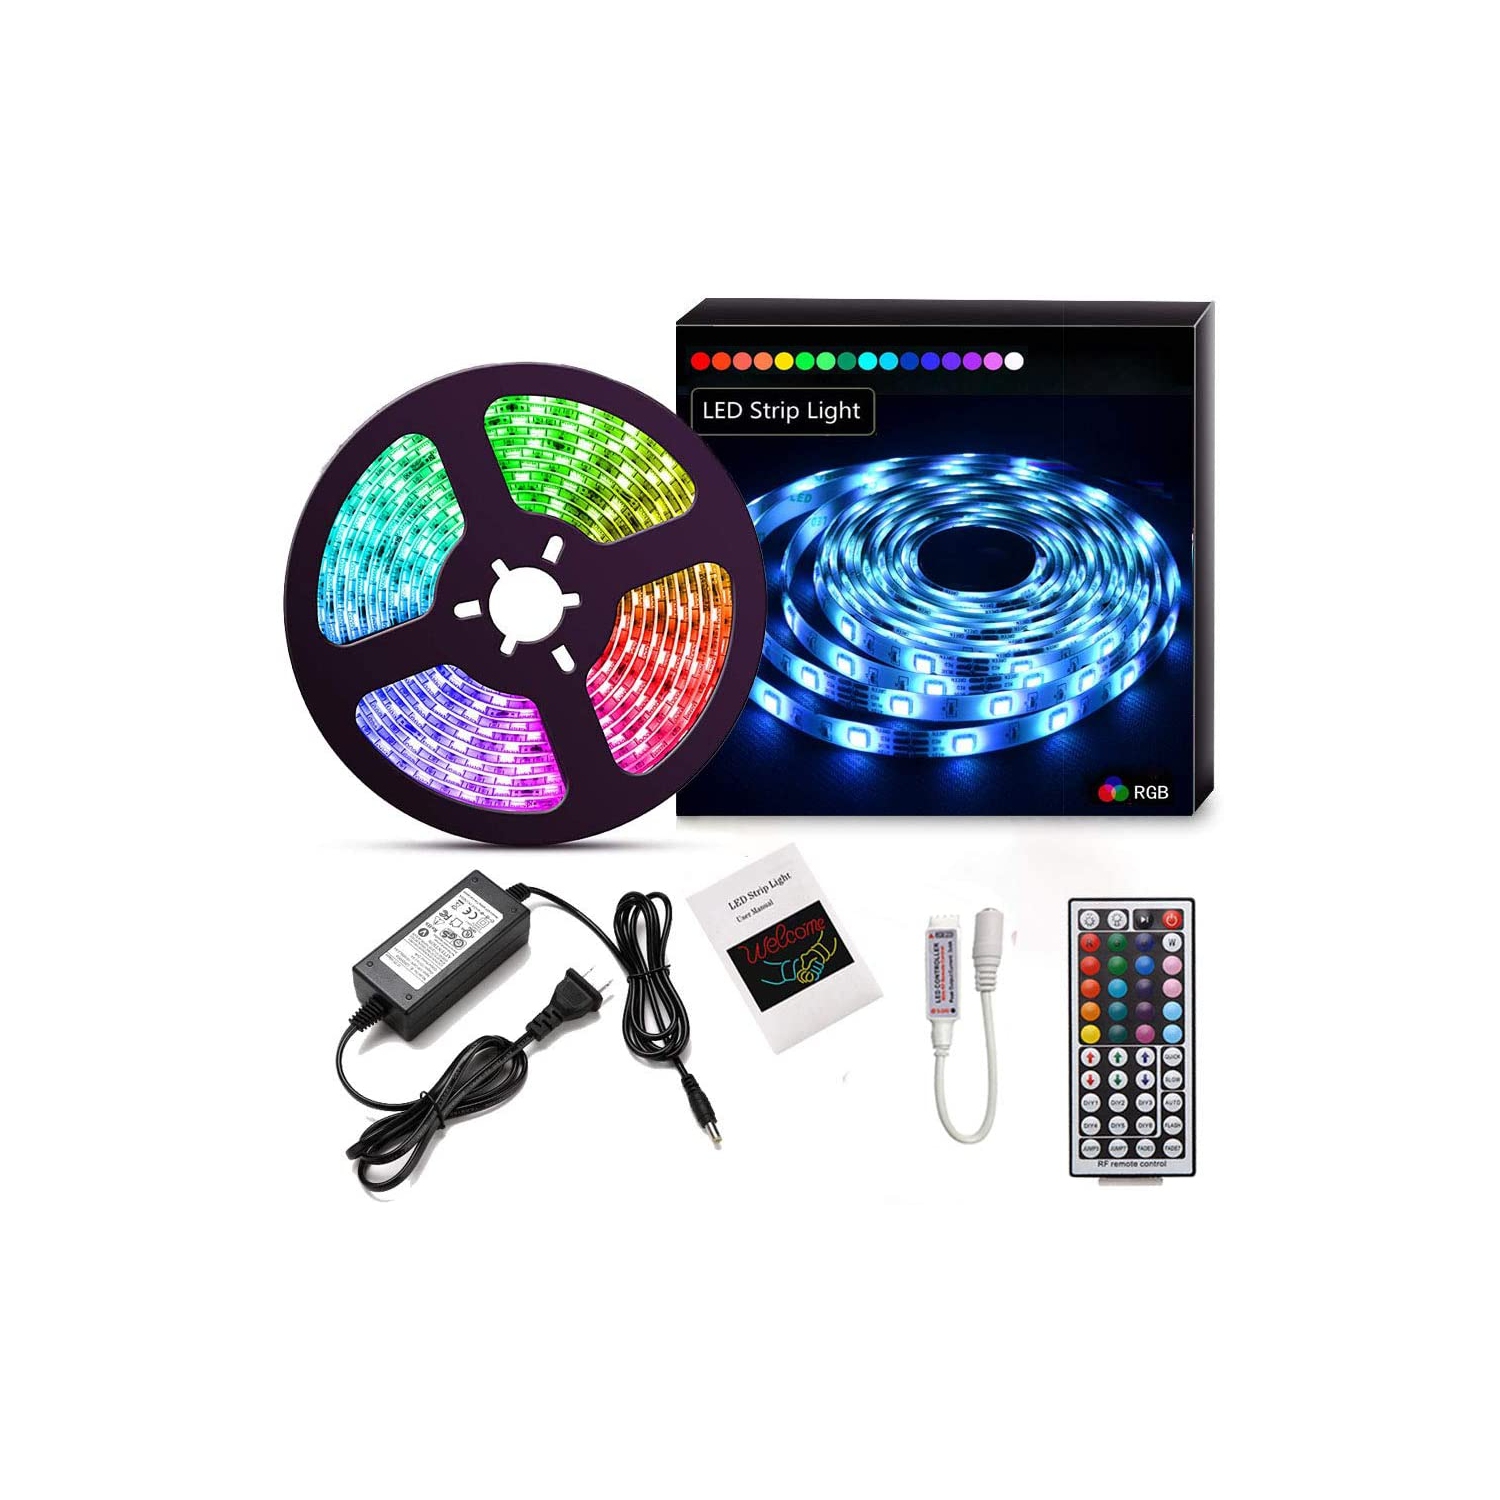 LED Strip Light Kit 16.4ft/5m Flexible Color Changing RF Remote Led Lights Strips 5050 RGB - perfect for christmas decoration